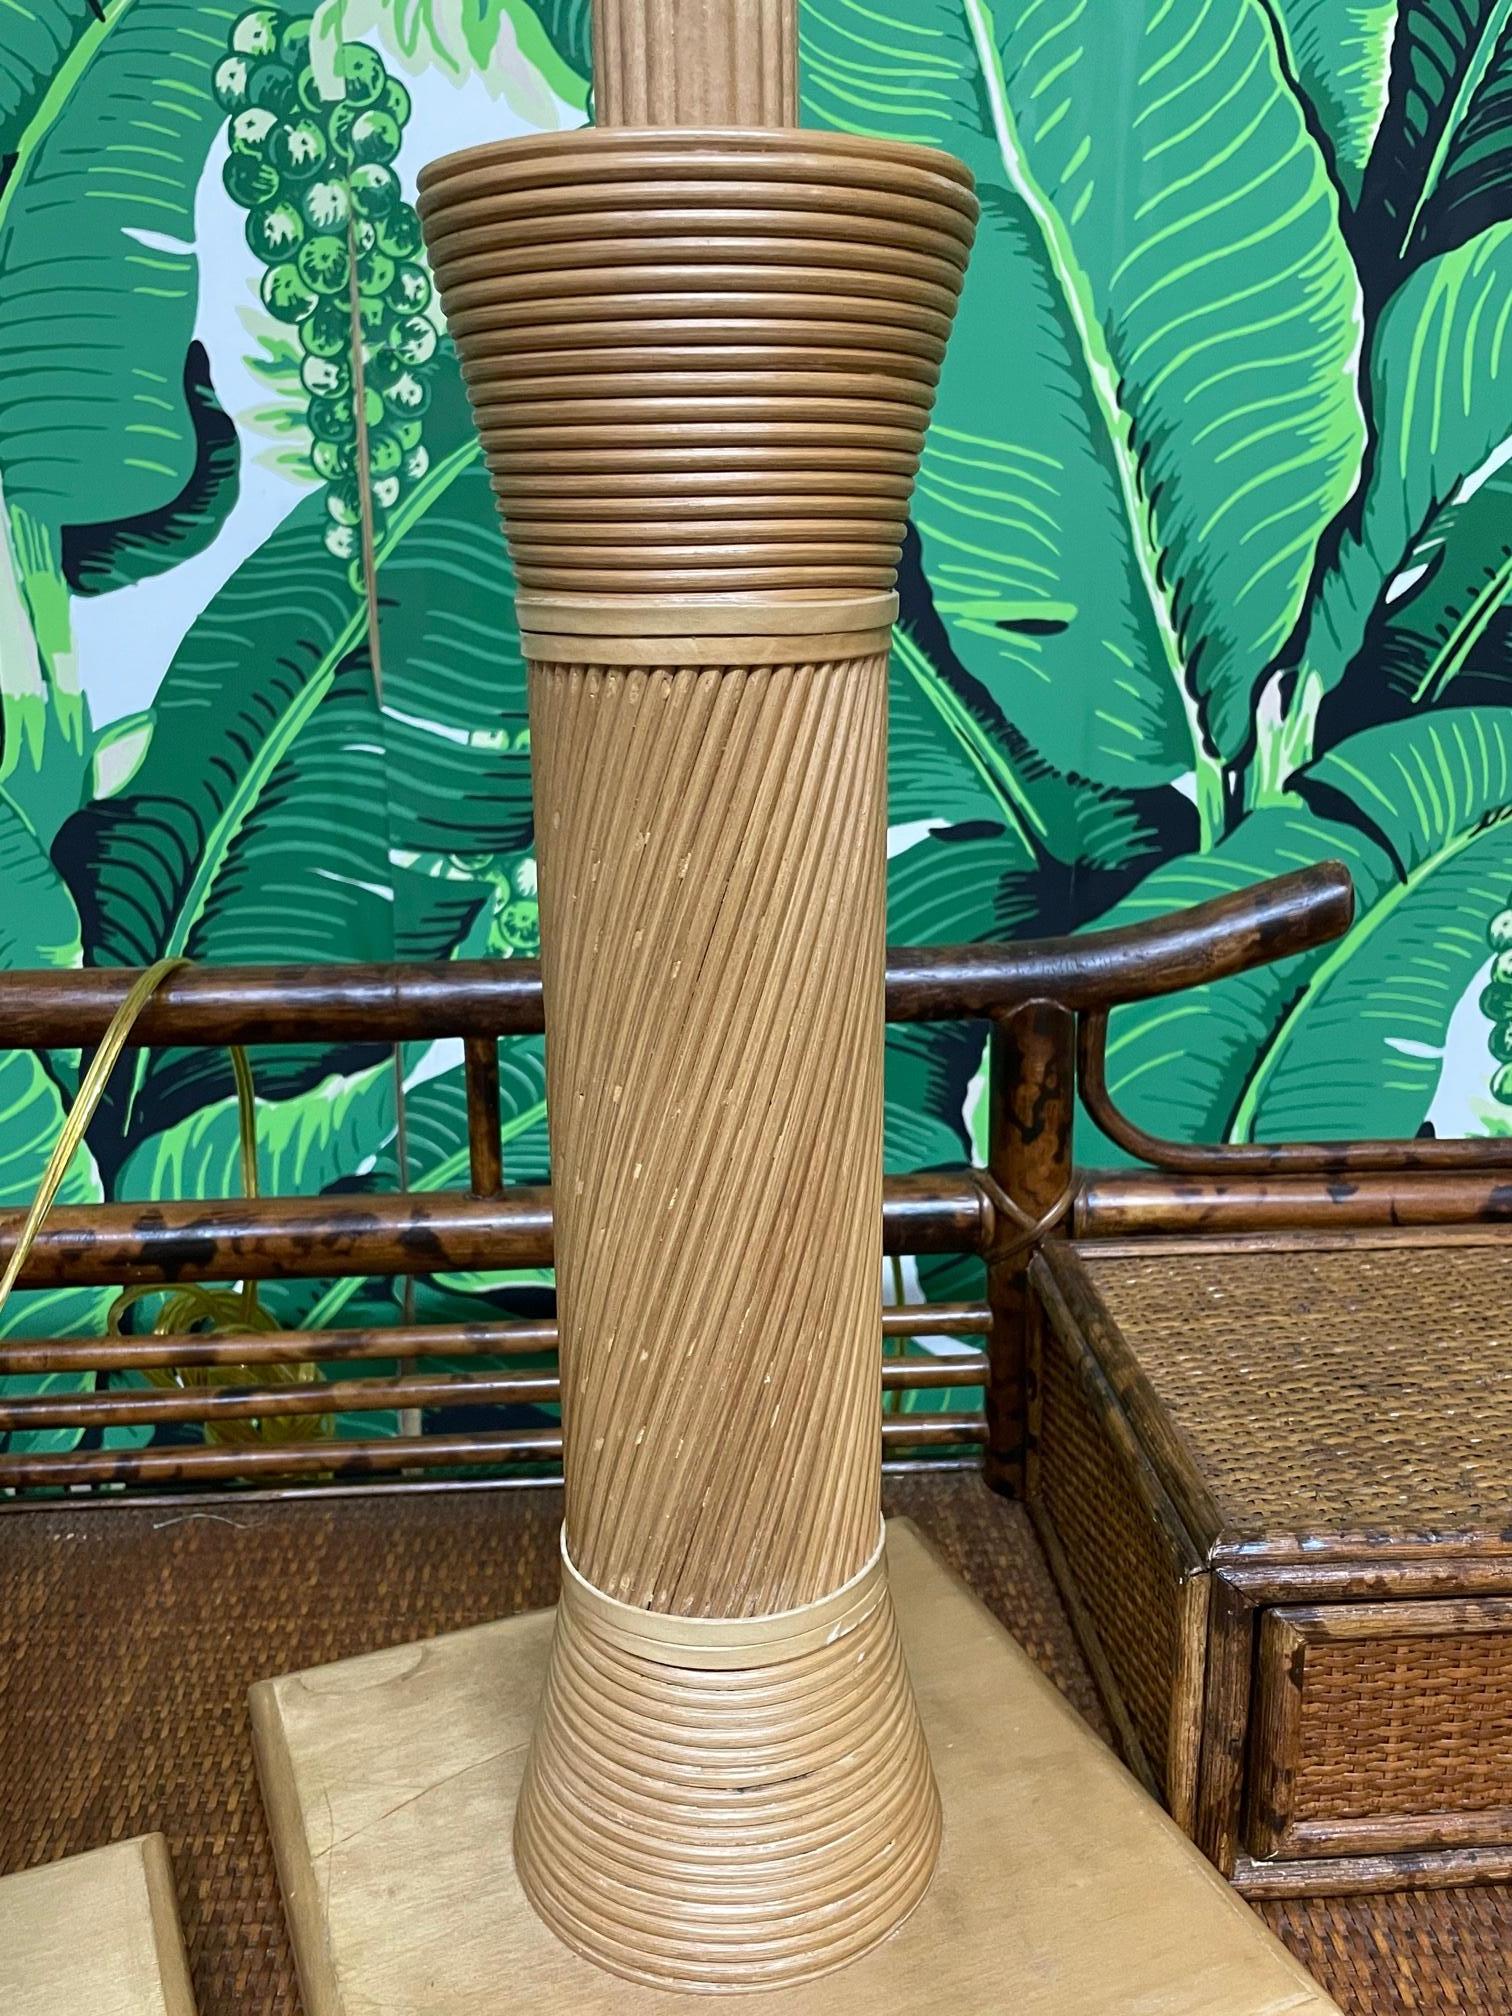 Pair of midcentury table lamps veneered in pencil reed rattan. In the style of  Betty Cobonpue. Very good condition with only very minor imperfections consistent with age.